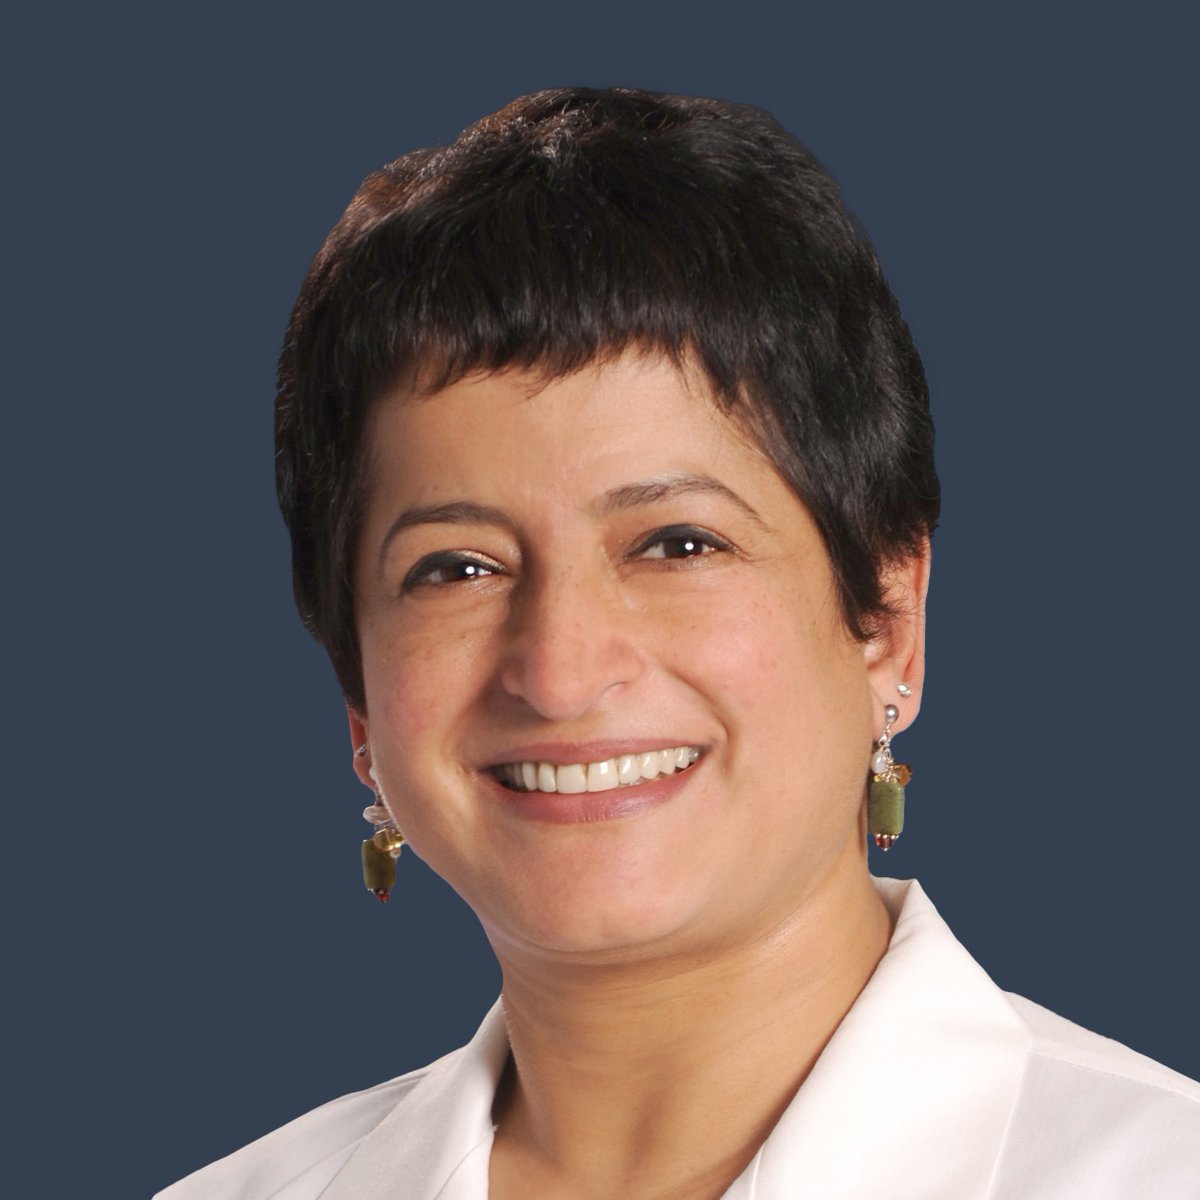 We're #MedStarHealthProud of our own Dr. Kavneet Gill, MBSS, for being recognized as a #TopDoctor for hospitalist medicine in the Nov. 2023 issue of @Baltimoremag. She is board certified in internal medicine. For more information, visit bit.ly/4aI2JpH.